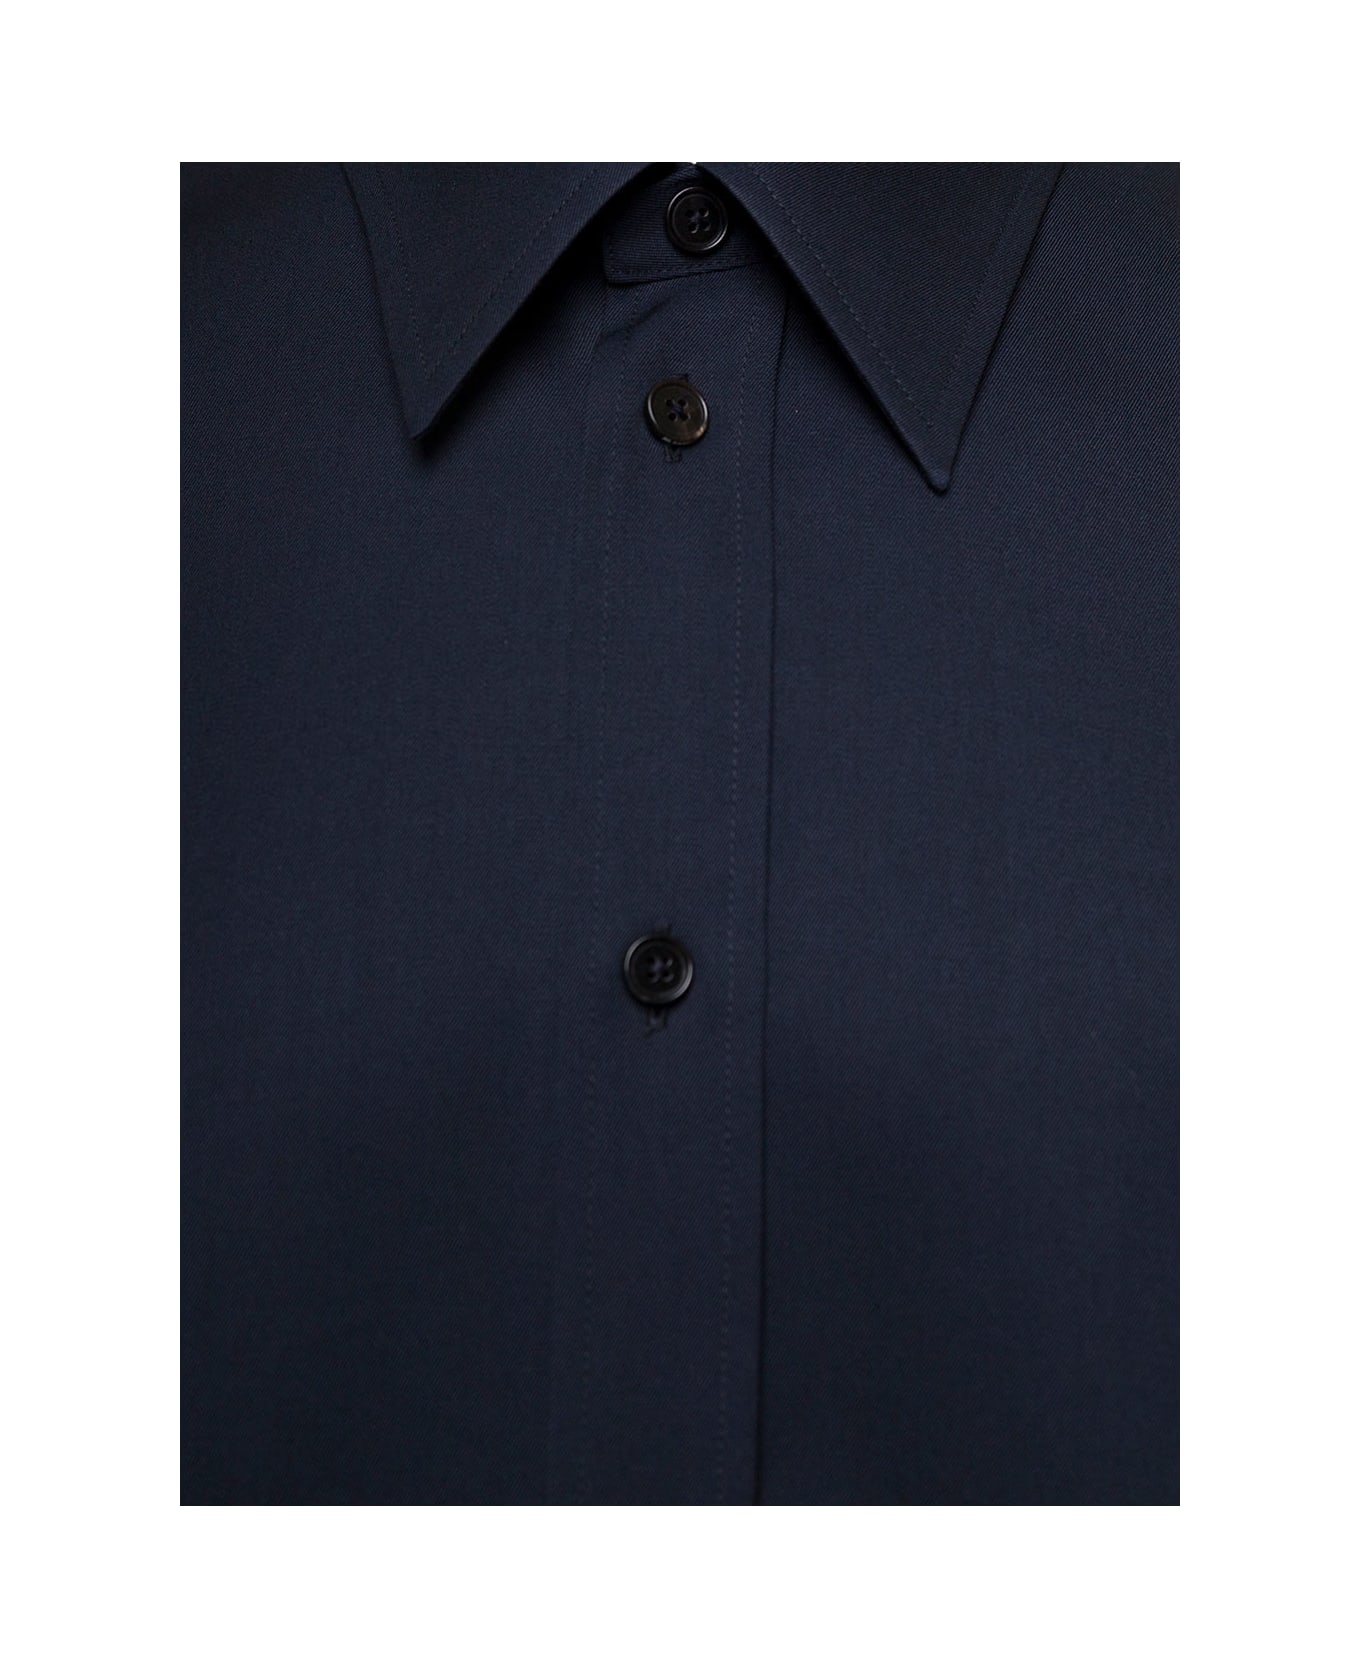 Jil Sander Blue Shirt With Classic Collar And Tonal Buttons In Wool Man - Blu